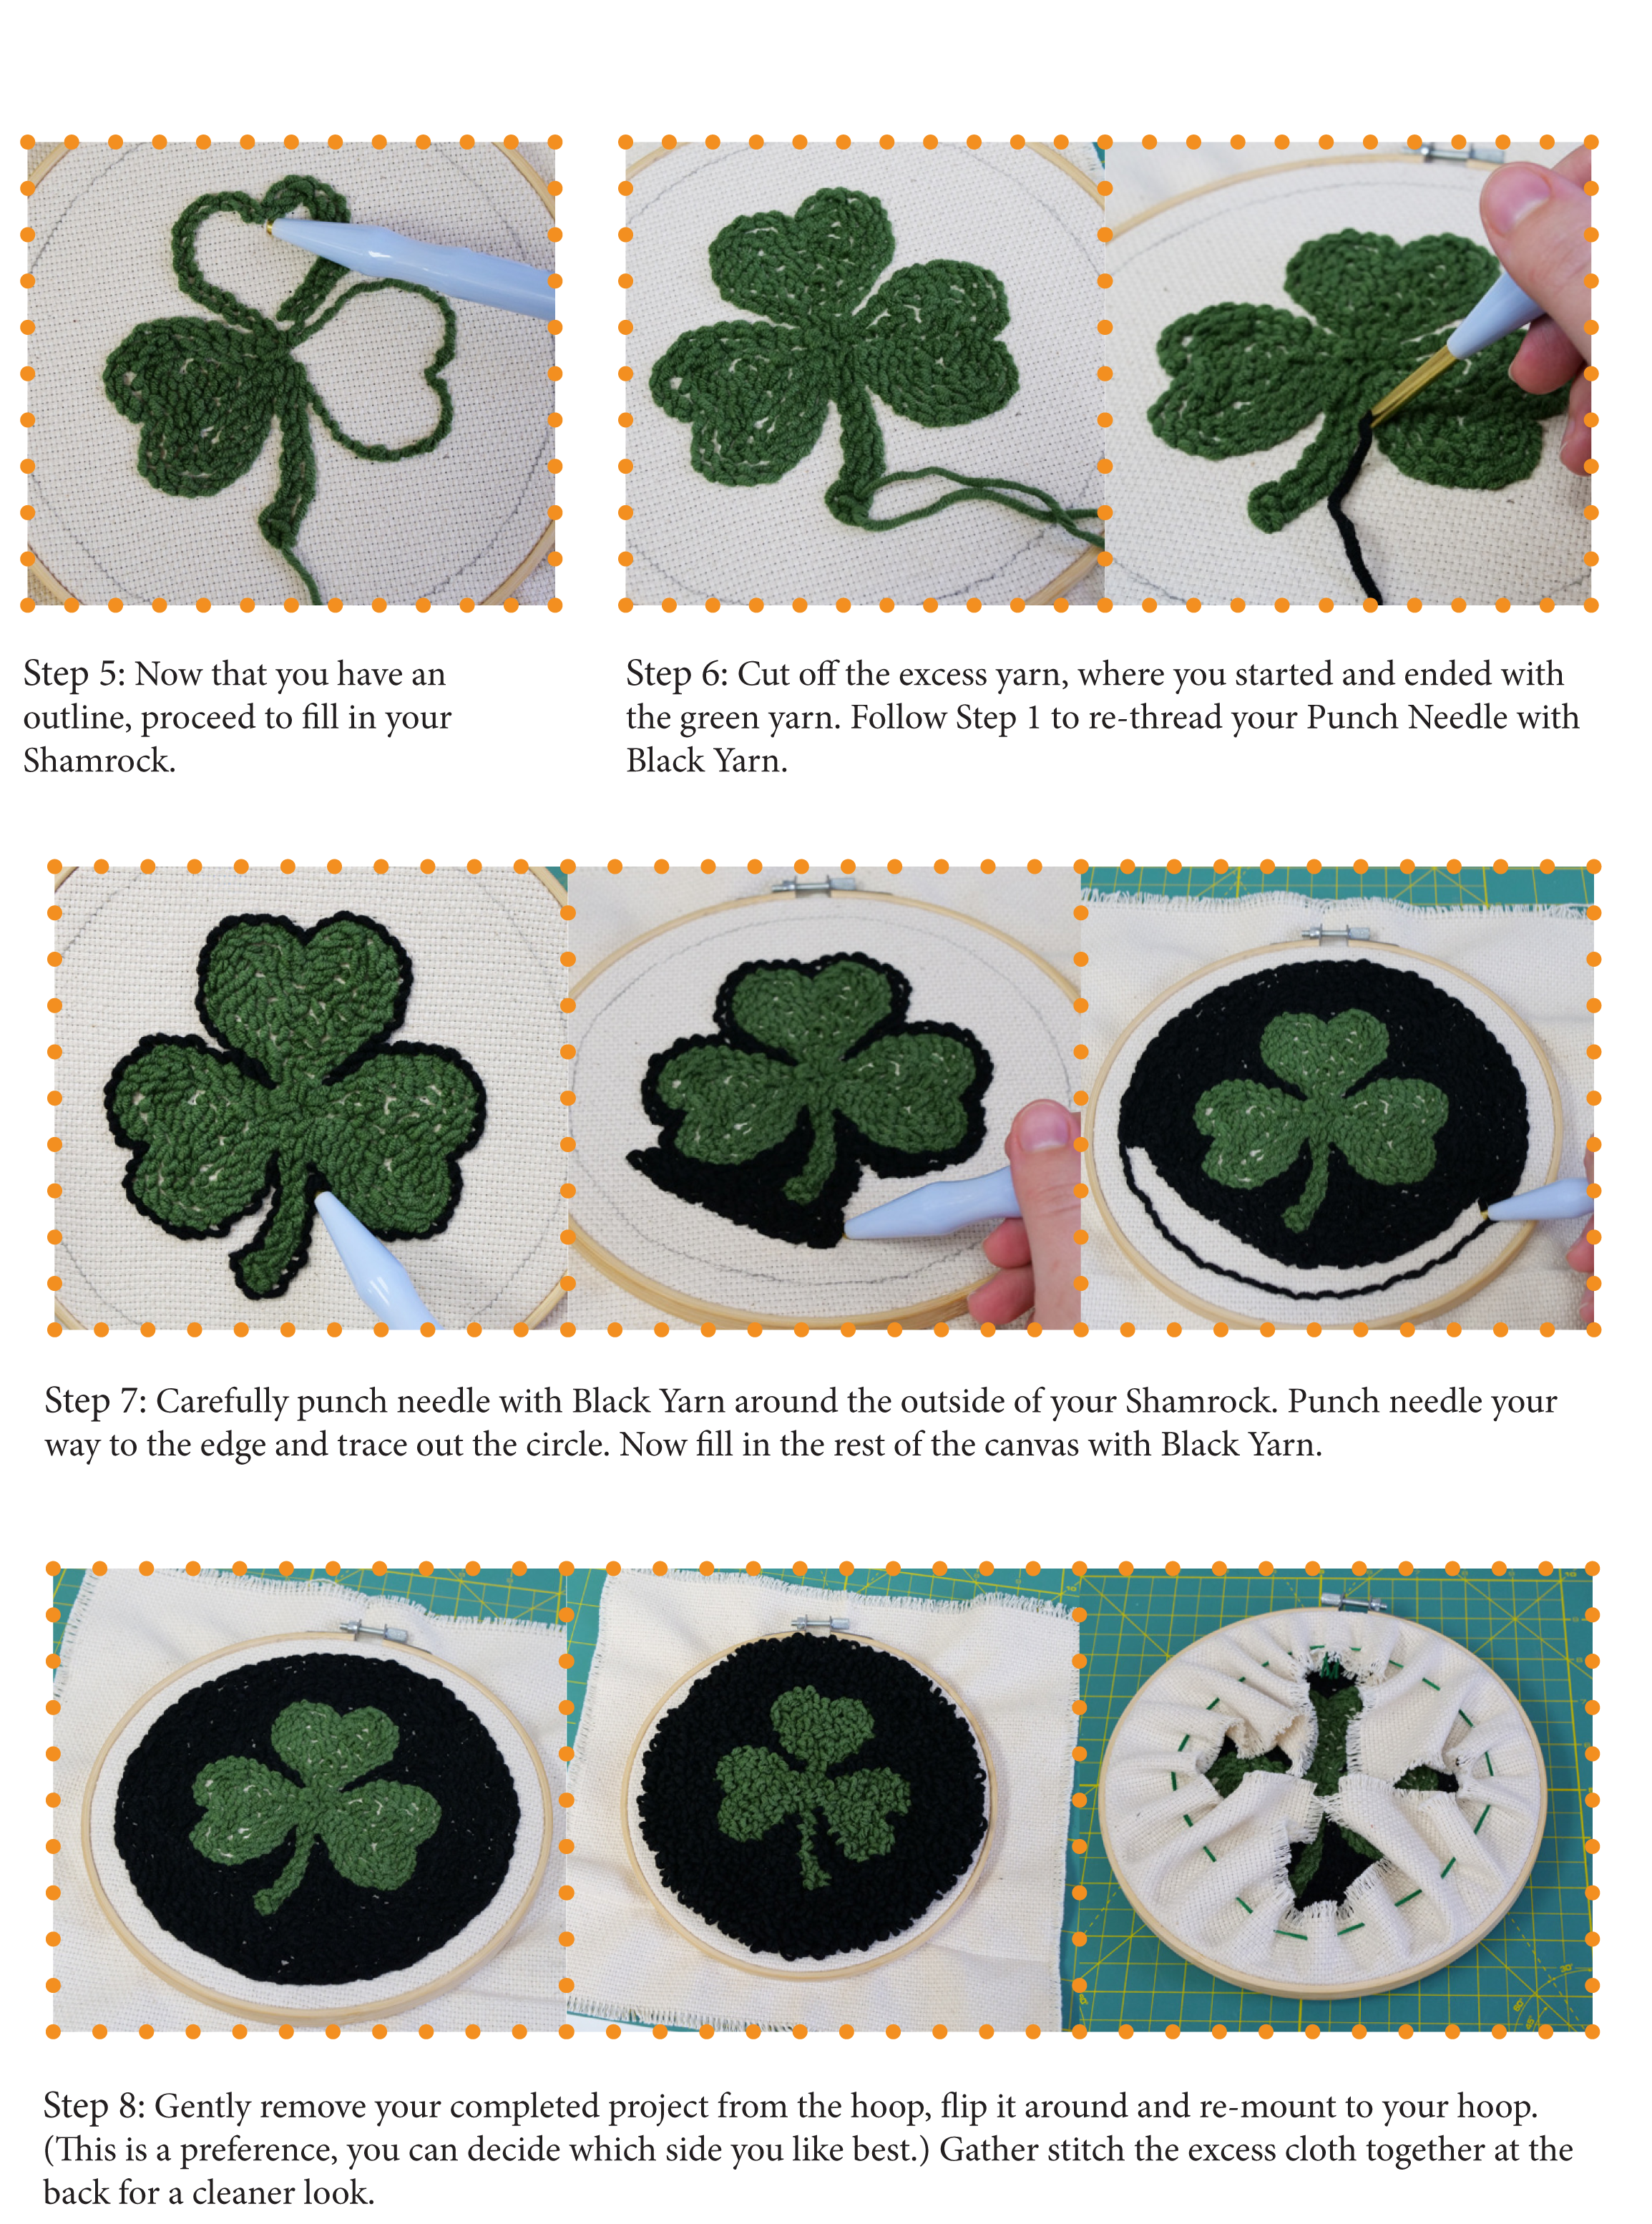 Steps to create your Shamrock Punch Needle